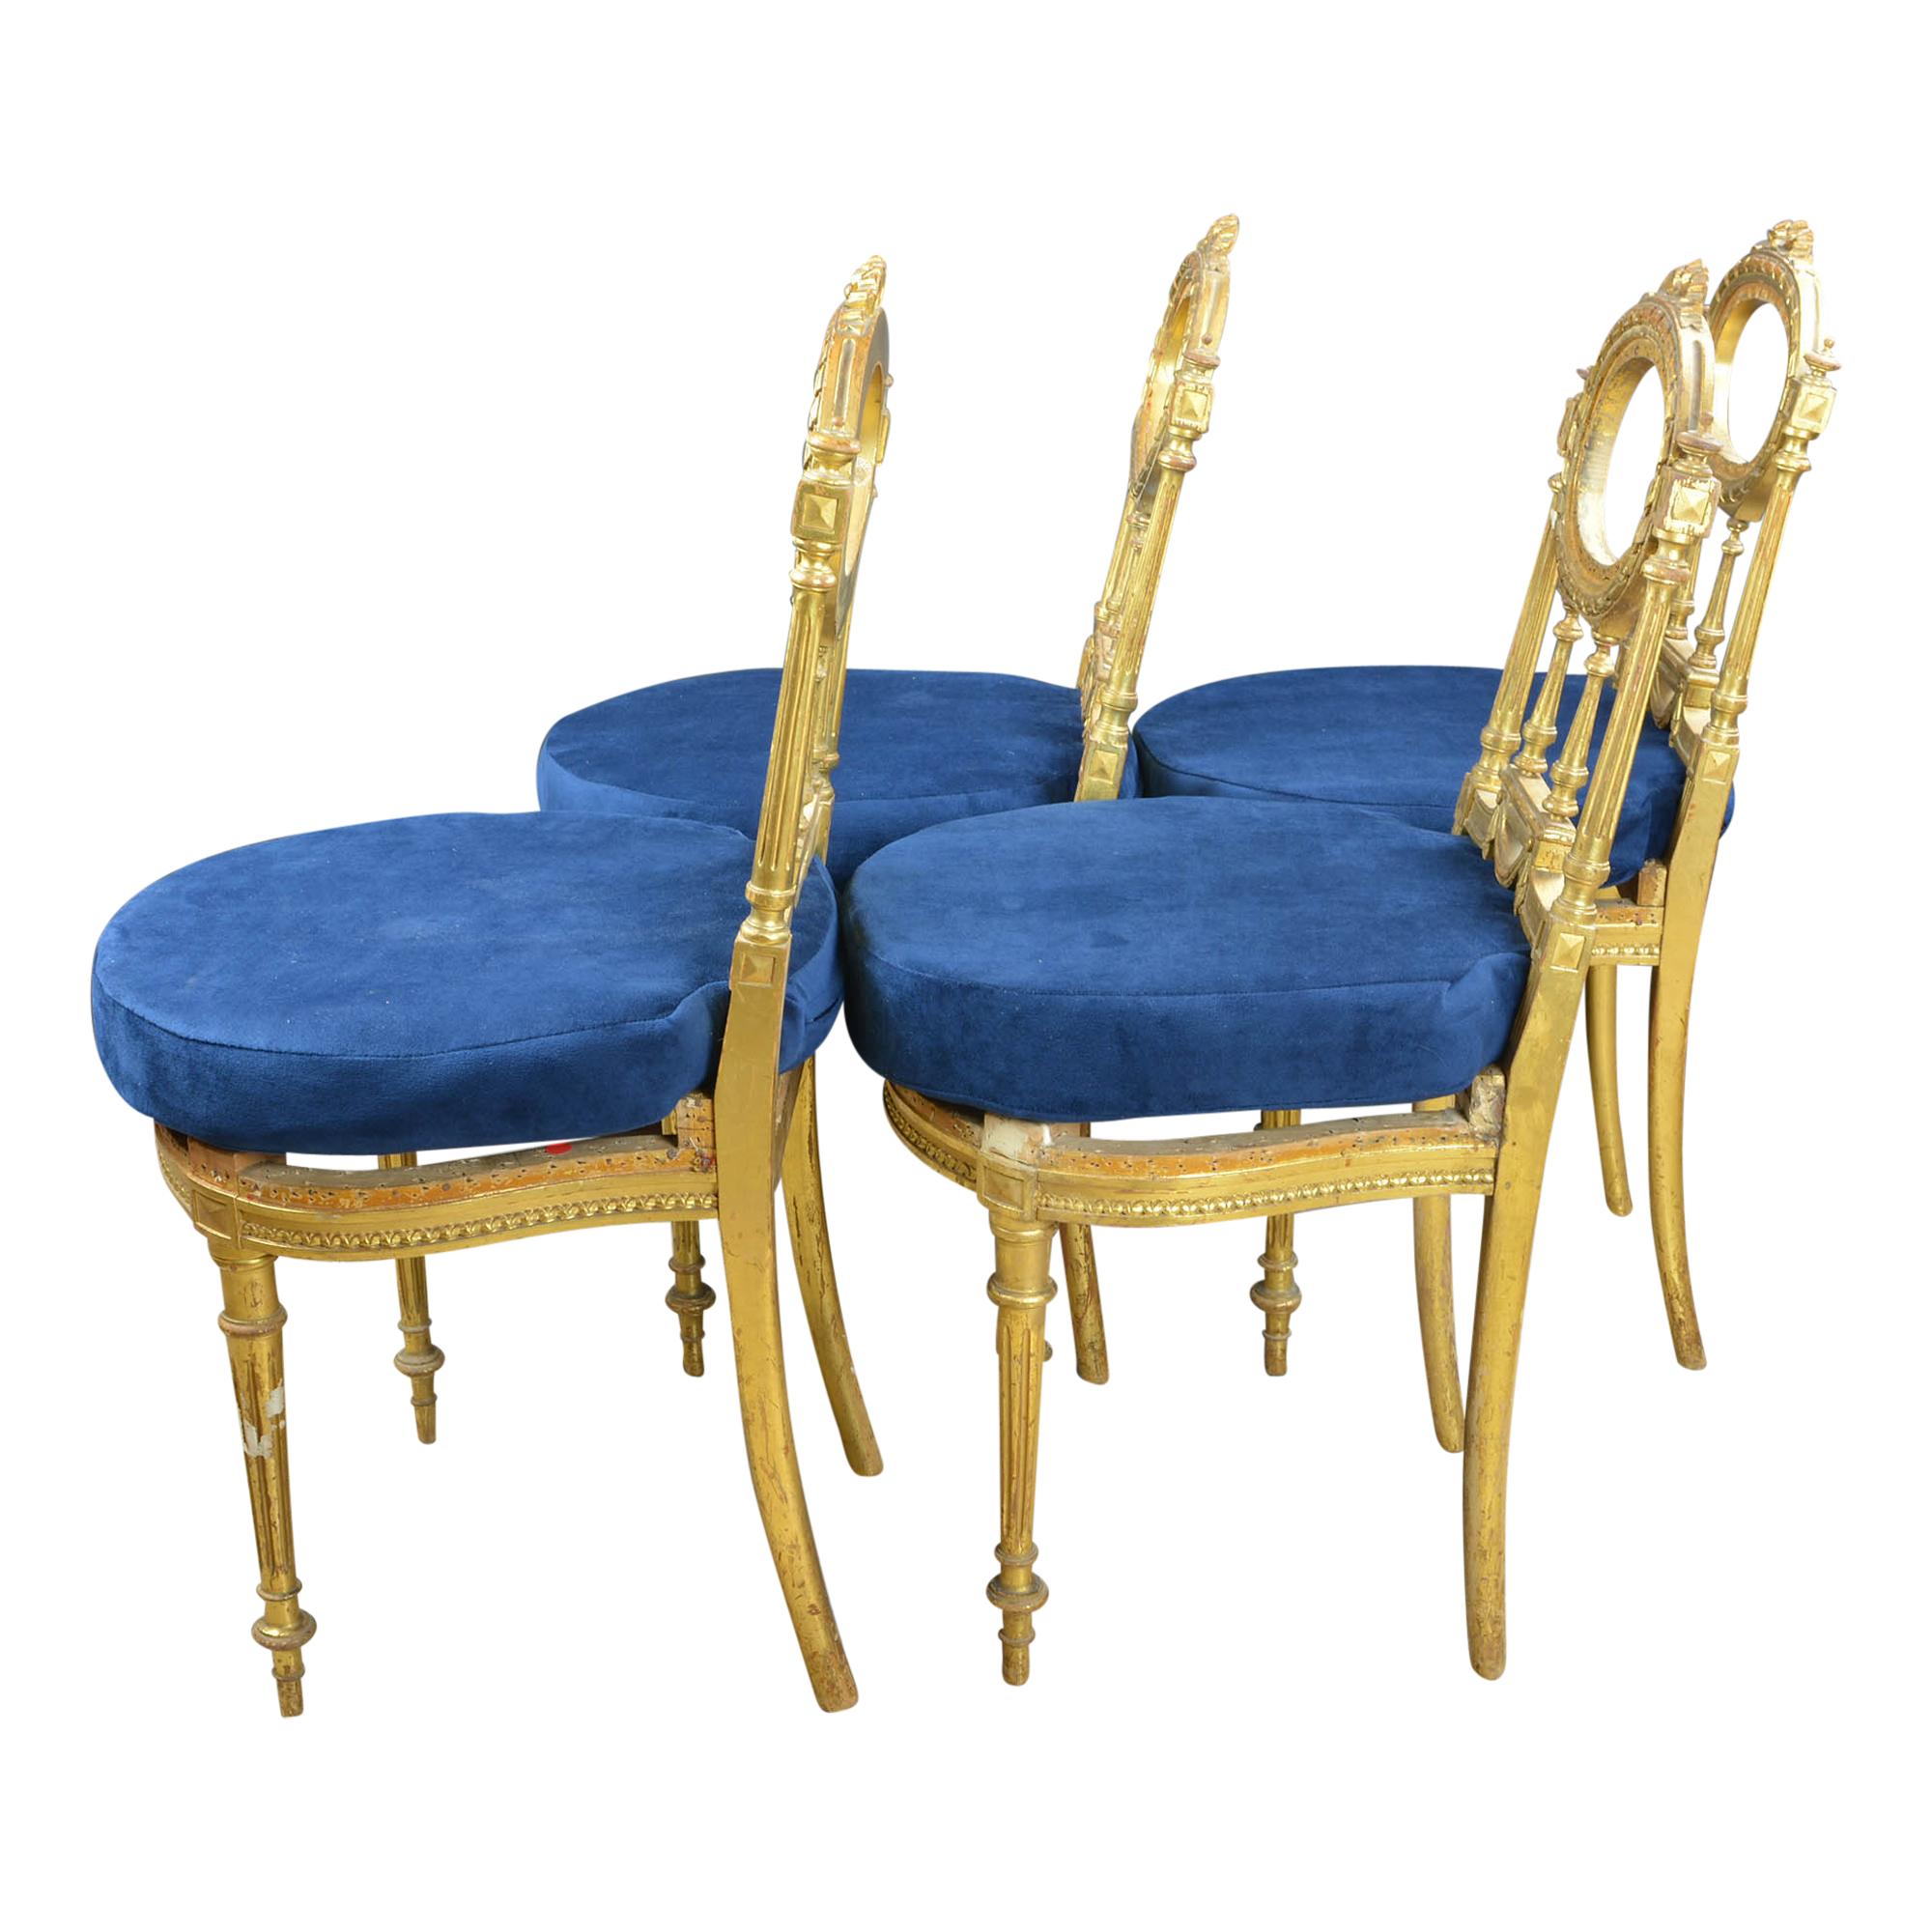 Louis XVI Antique Giltwood Chairs with Blue Velvet Cushions Set of 4 For Sale